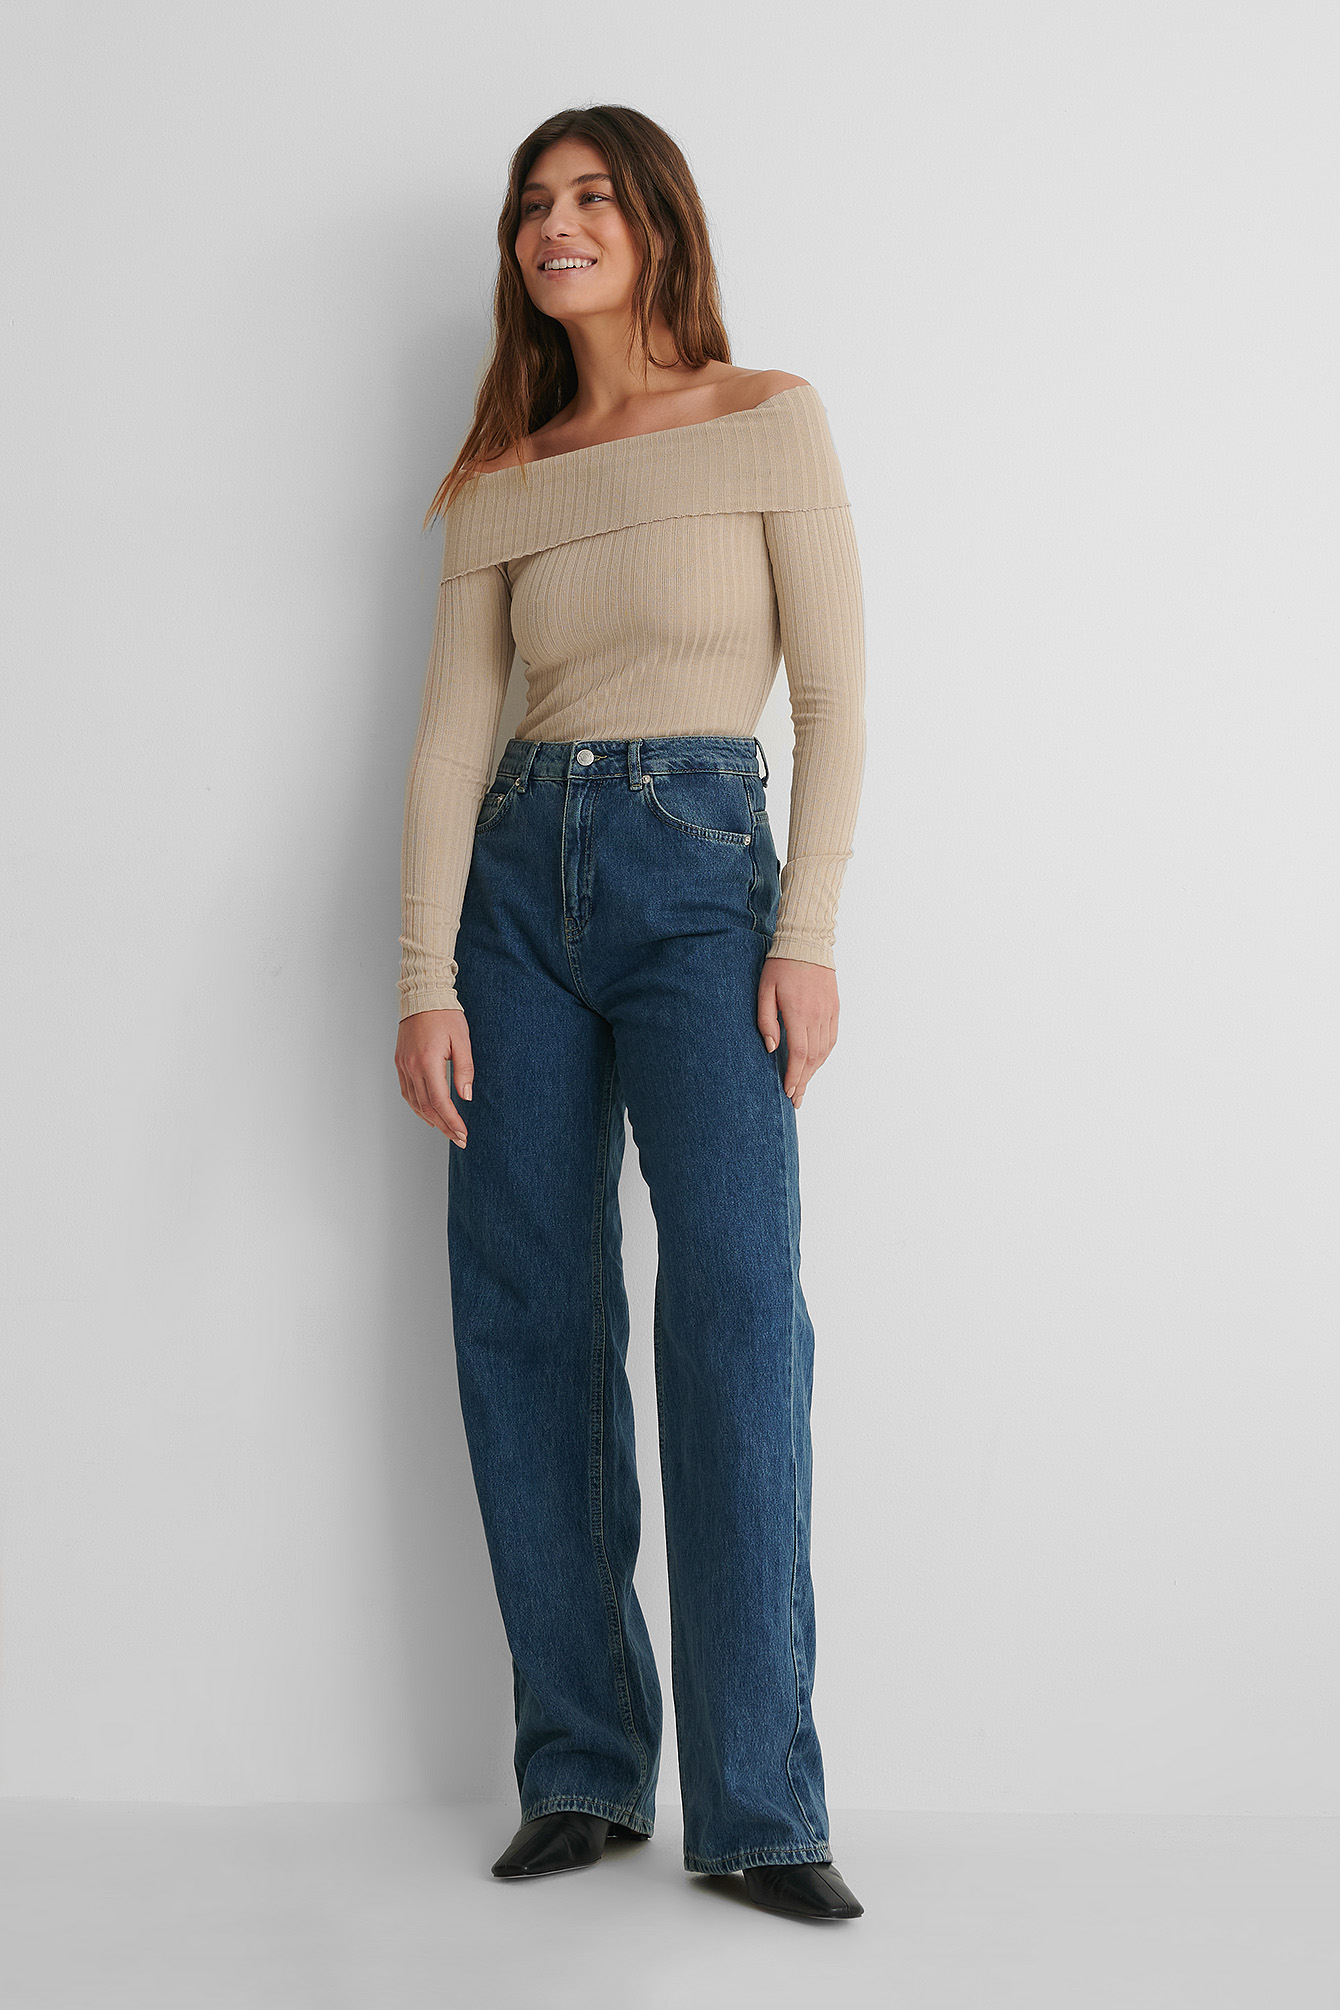 Long Sleeve Rib Overlap Top with Jeans.